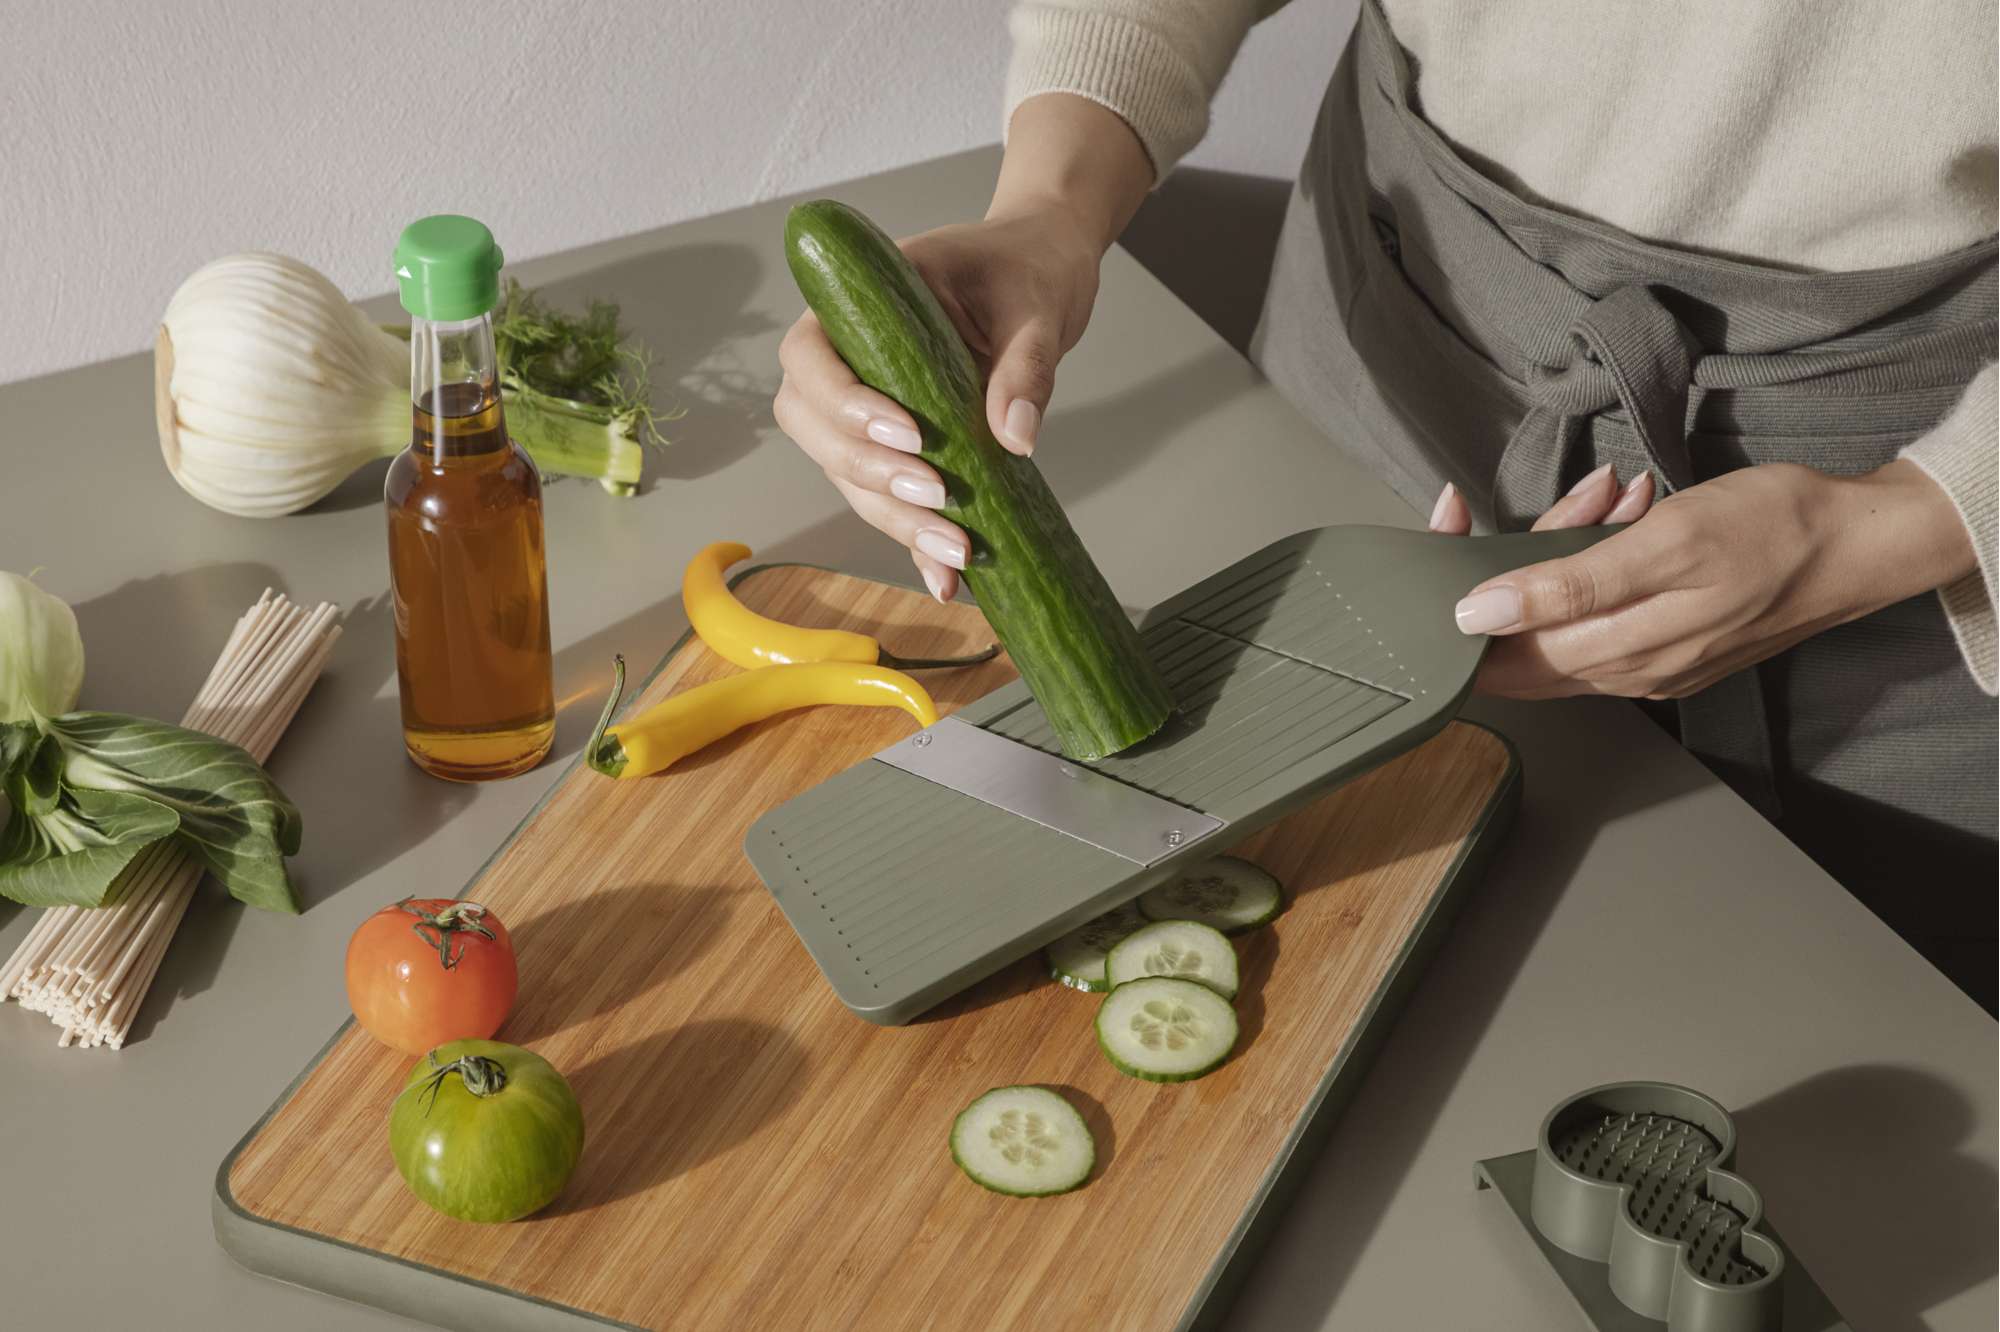 https://www.evasolo.com/%2FFiles%2FImages%2FPlytix%2FLifestyle_Photo_2%2F531536_Eva_Solo_Green_tools_Mandolin_slicer_table_with_hand_l.jpg